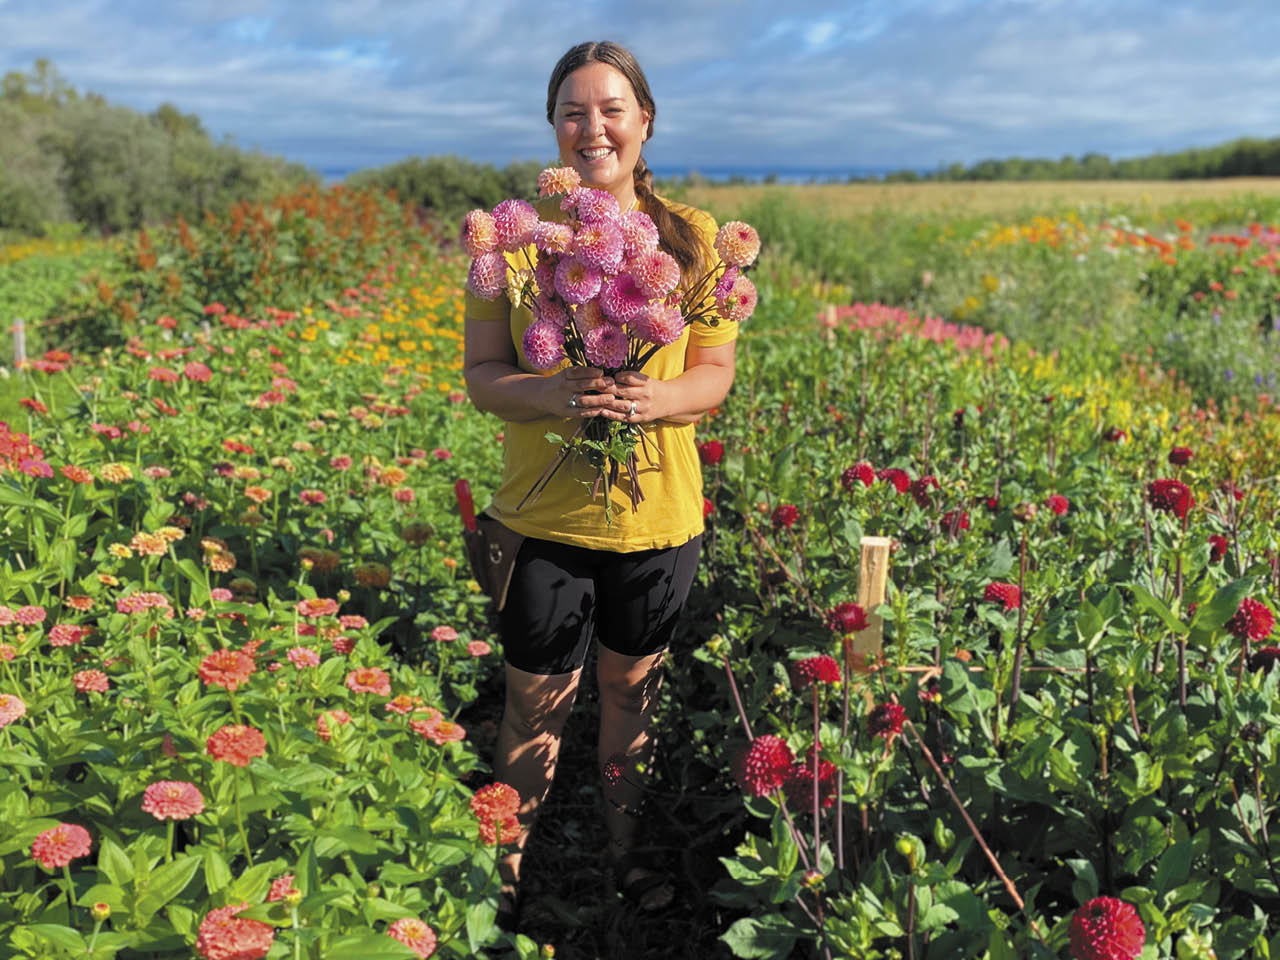 A woman standing in a field of flowers holding a bouquet of pink flowers